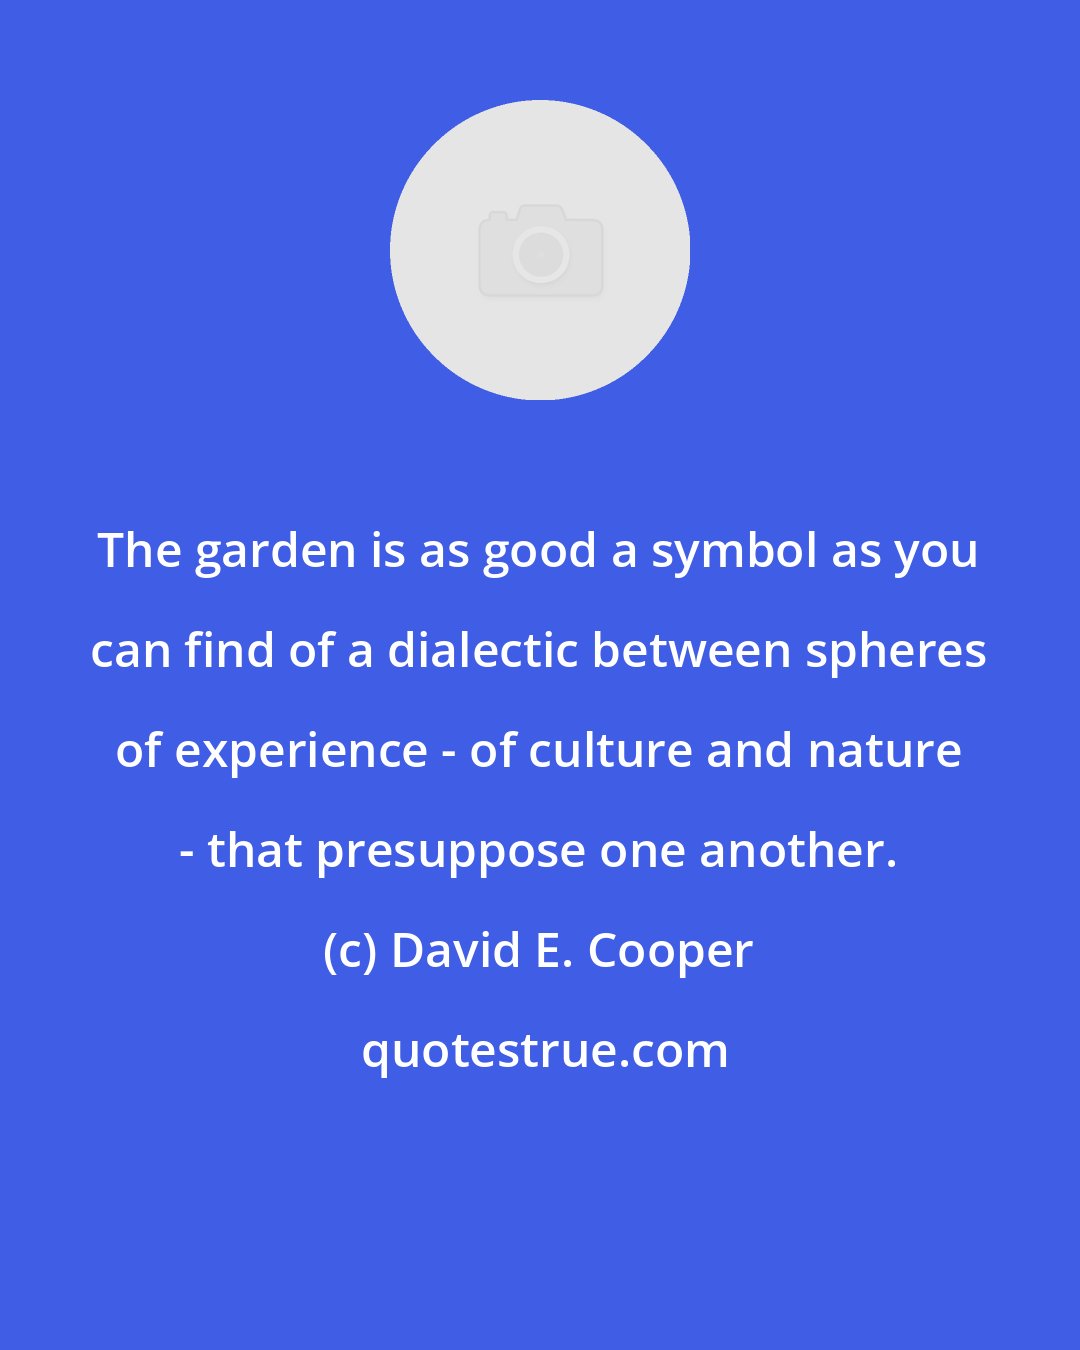 David E. Cooper: The garden is as good a symbol as you can find of a dialectic between spheres of experience - of culture and nature - that presuppose one another.